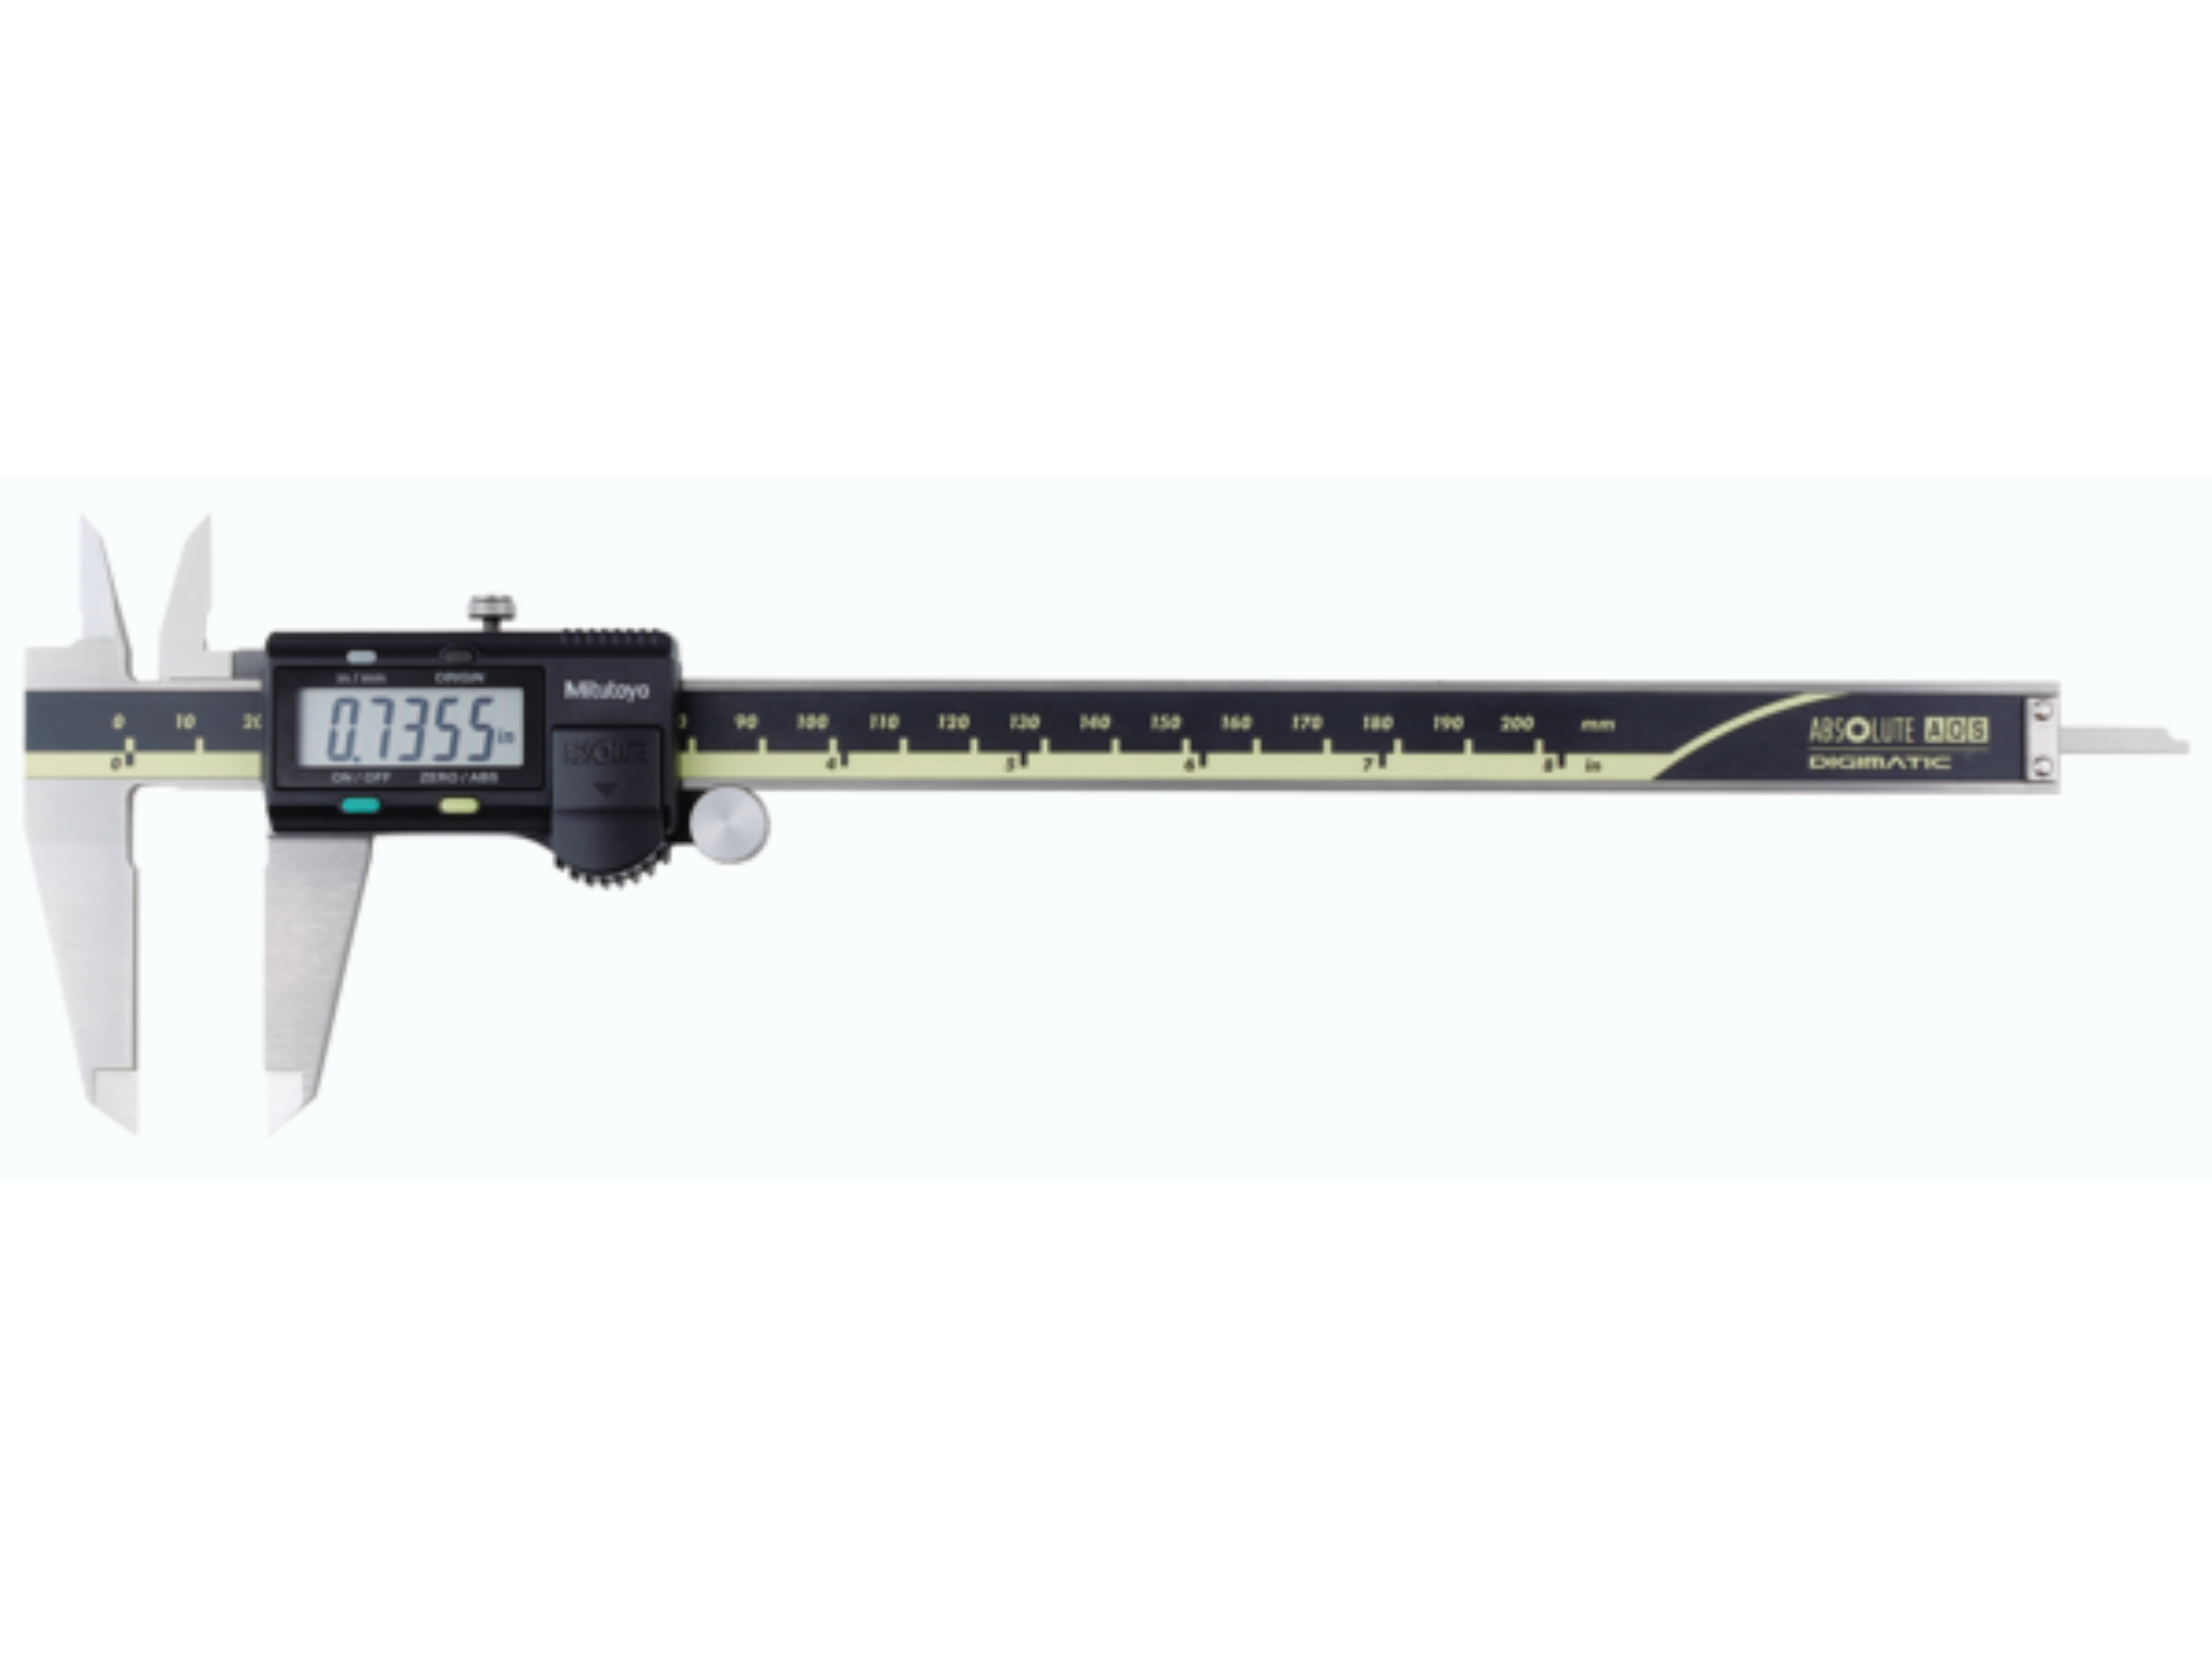 ABSOLUTE AOS Calipers 0-300mm Square Depth Rod & Thumb Roller 500-173-30